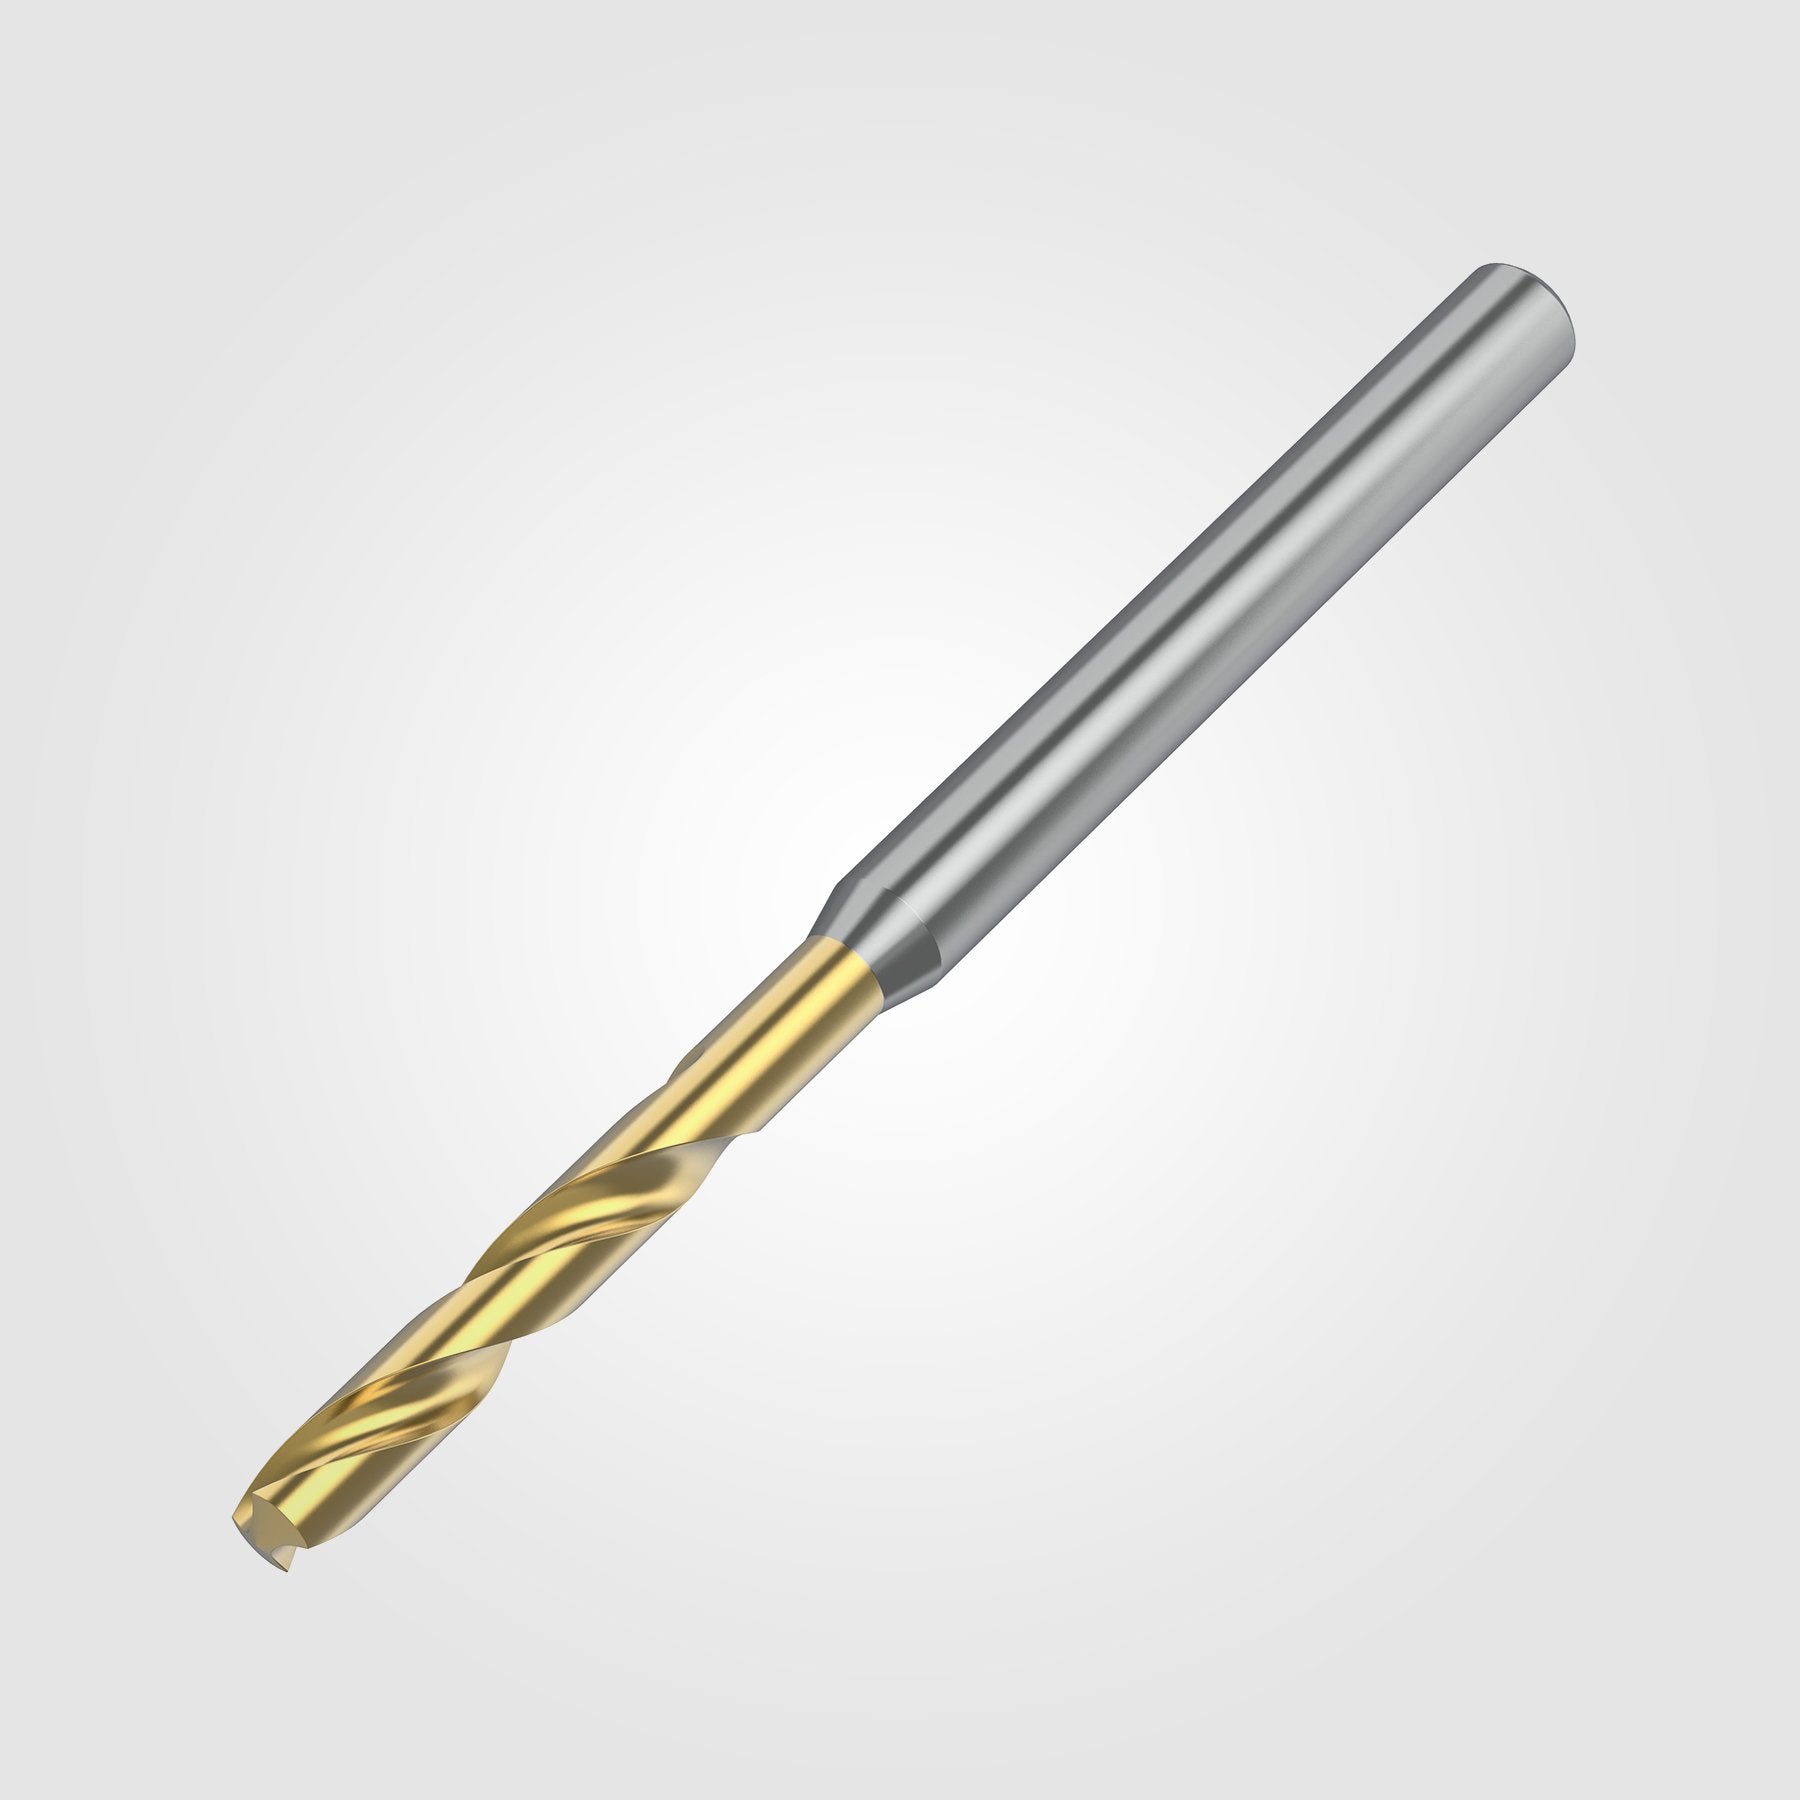 GOdrill (THROUGH COOLANT) | 7.9mm / .3110" / 5xD | SOLID CARBIDE DRILL | 4149251